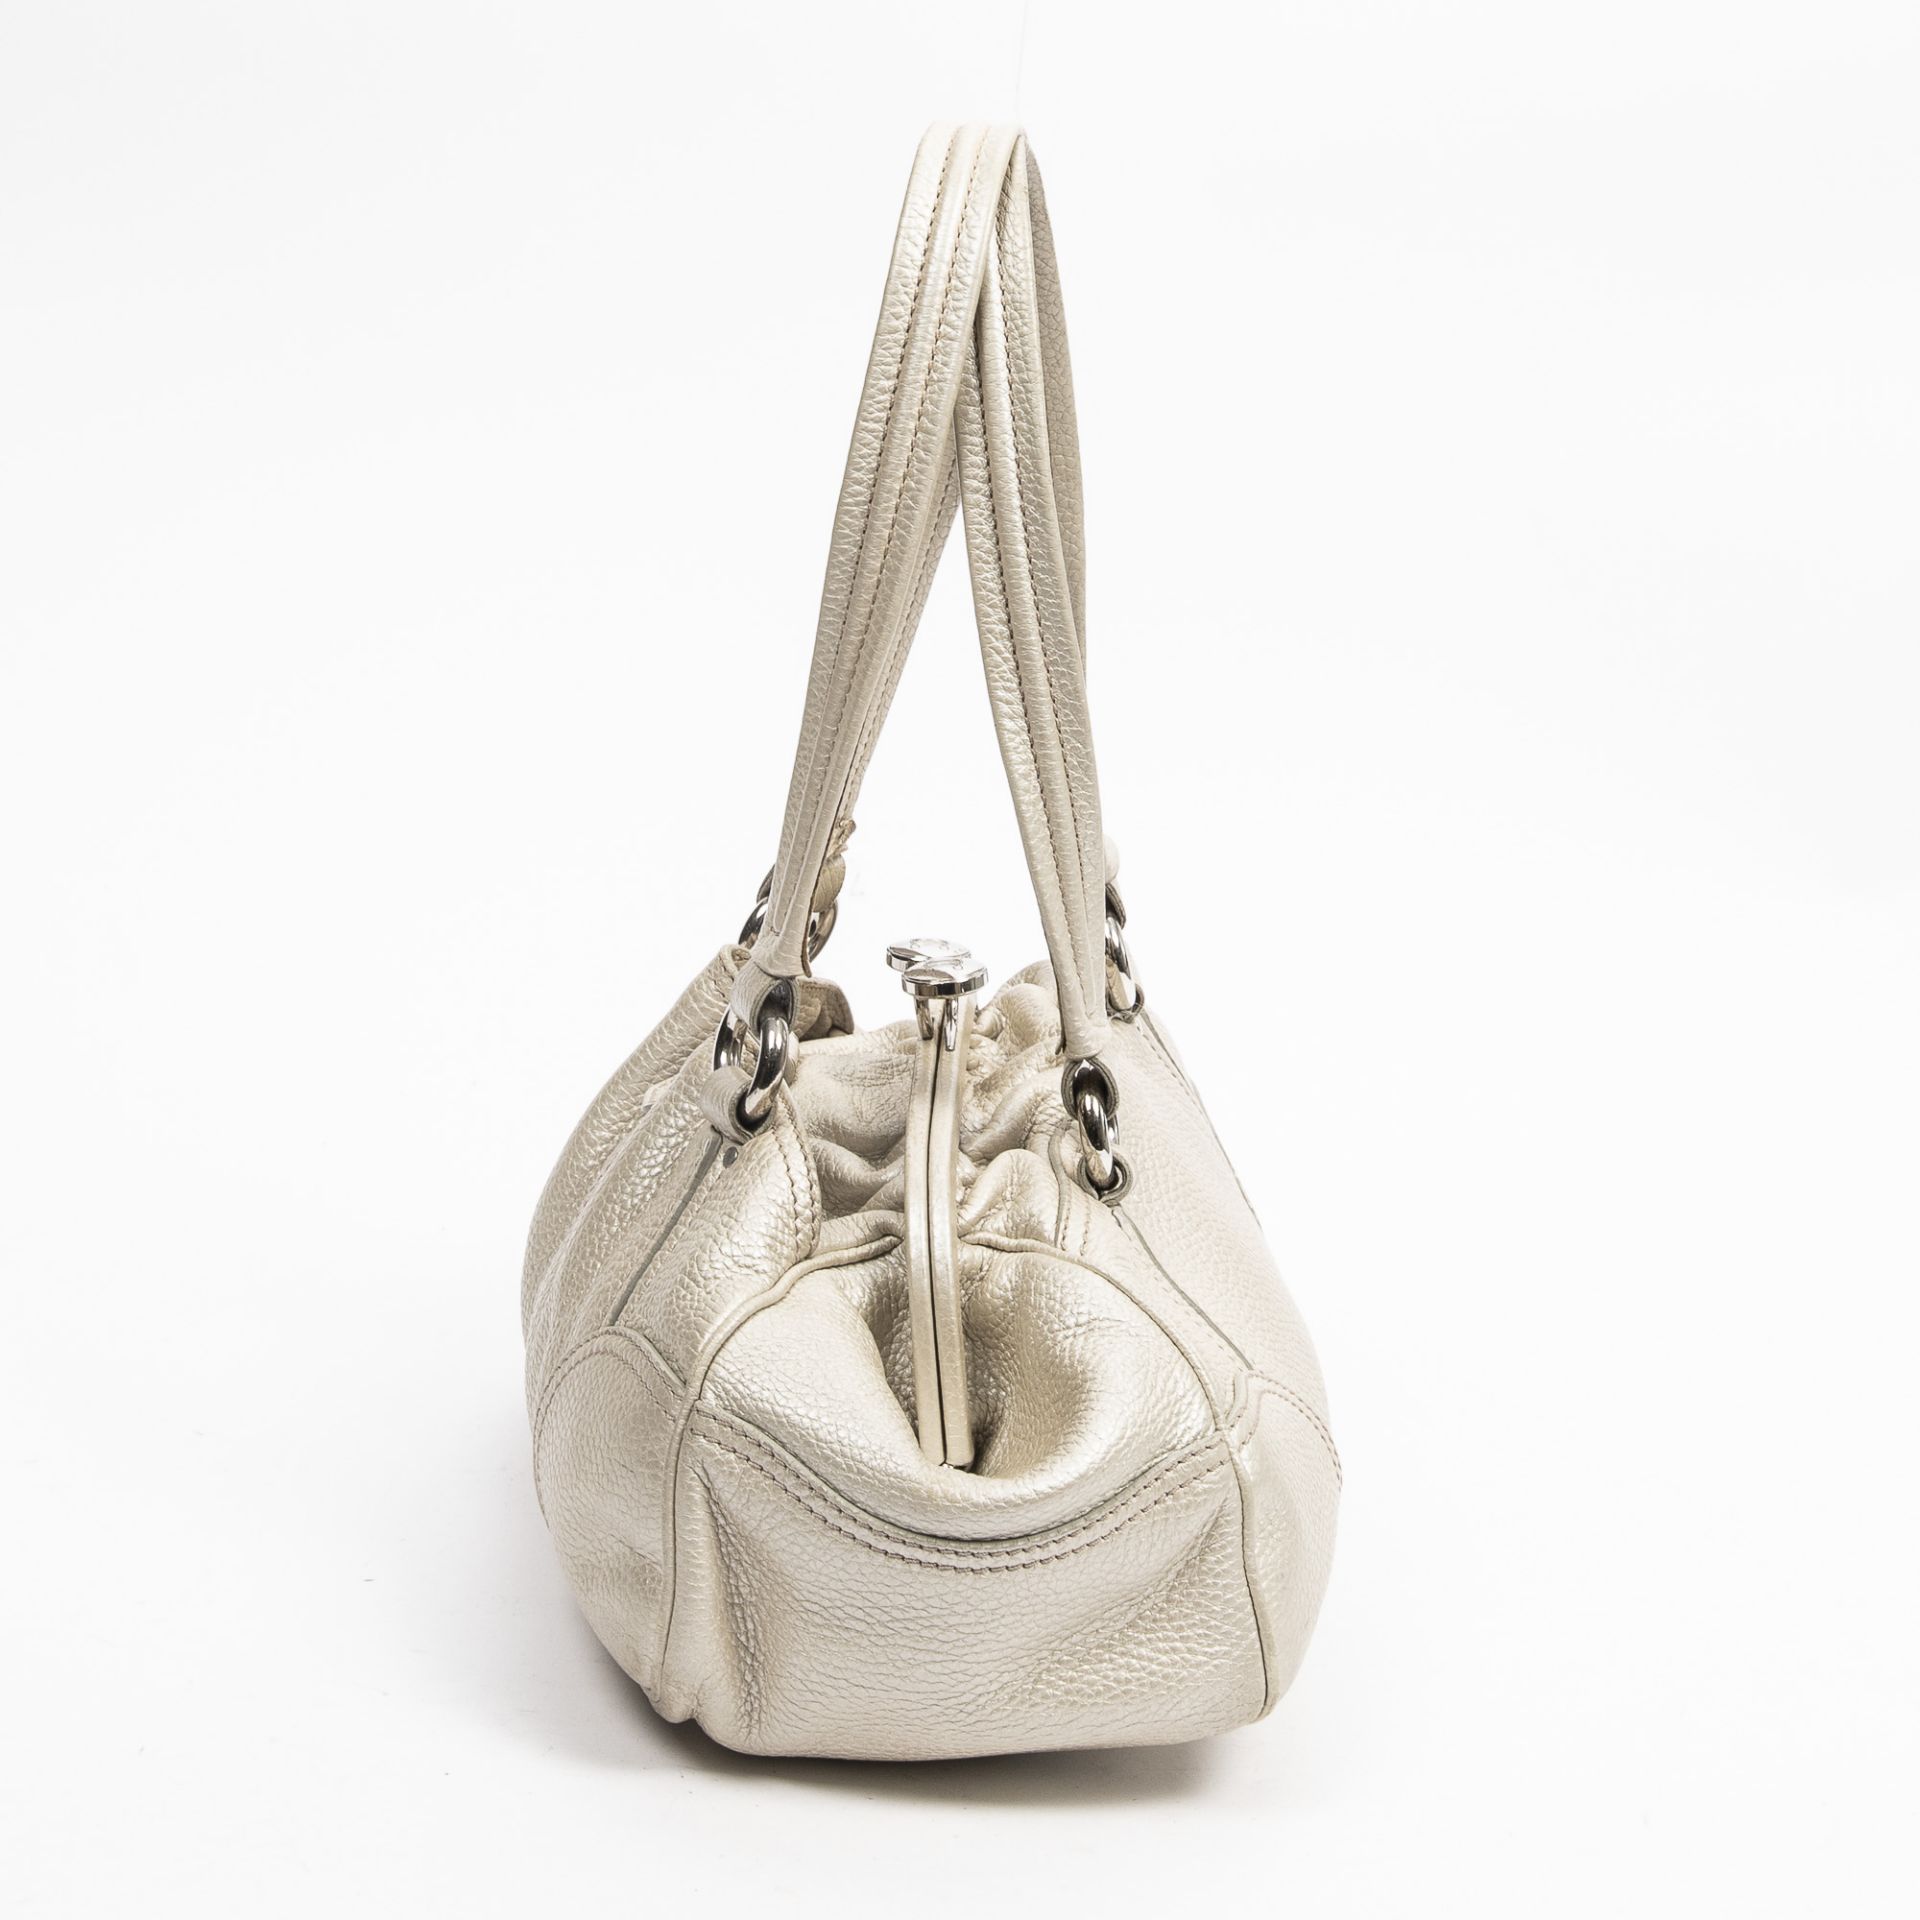 RRP £760.00 Lot To Contain 1 Celine Calf Leather Bowling Bag Shoulder Bag In Beige - 34*22*17cm - AB - Image 3 of 4